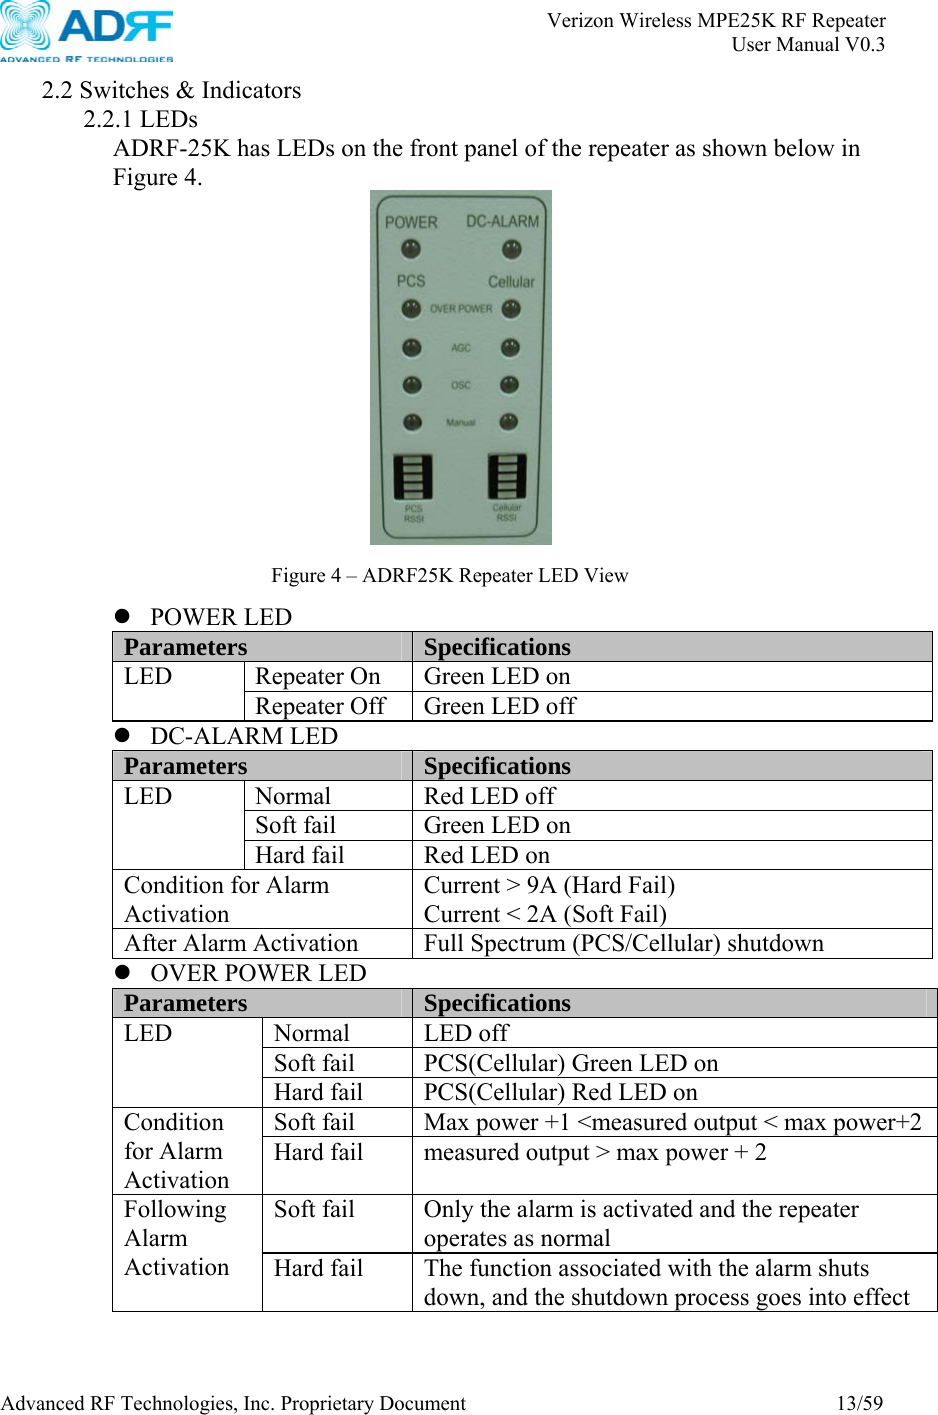       Verizon Wireless MPE25K RF Repeater   User Manual V0.3 Advanced RF Technologies, Inc. Proprietary Document  13/59  2.2 Switches &amp; Indicators  2.2.1 LEDs ADRF-25K has LEDs on the front panel of the repeater as shown below in Figure 4.    z POWER LED Parameters  Specifications Repeater On  Green LED on LED Repeater Off  Green LED off z DC-ALARM LED Parameters  Specifications Normal  Red LED off Soft fail  Green LED on LED Hard fail  Red LED on Condition for Alarm Activation Current &gt; 9A (Hard Fail) Current &lt; 2A (Soft Fail) After Alarm Activation  Full Spectrum (PCS/Cellular) shutdown z OVER POWER LED Parameters  Specifications Normal LED off Soft fail  PCS(Cellular) Green LED on LED Hard fail  PCS(Cellular) Red LED on Soft fail  Max power +1 &lt;measured output &lt; max power+2 Condition for Alarm Activation Hard fail  measured output &gt; max power + 2 Soft fail  Only the alarm is activated and the repeater operates as normal Following Alarm Activation  Hard fail  The function associated with the alarm shuts down, and the shutdown process goes into effect  Figure 4 – ADRF25K Repeater LED View 